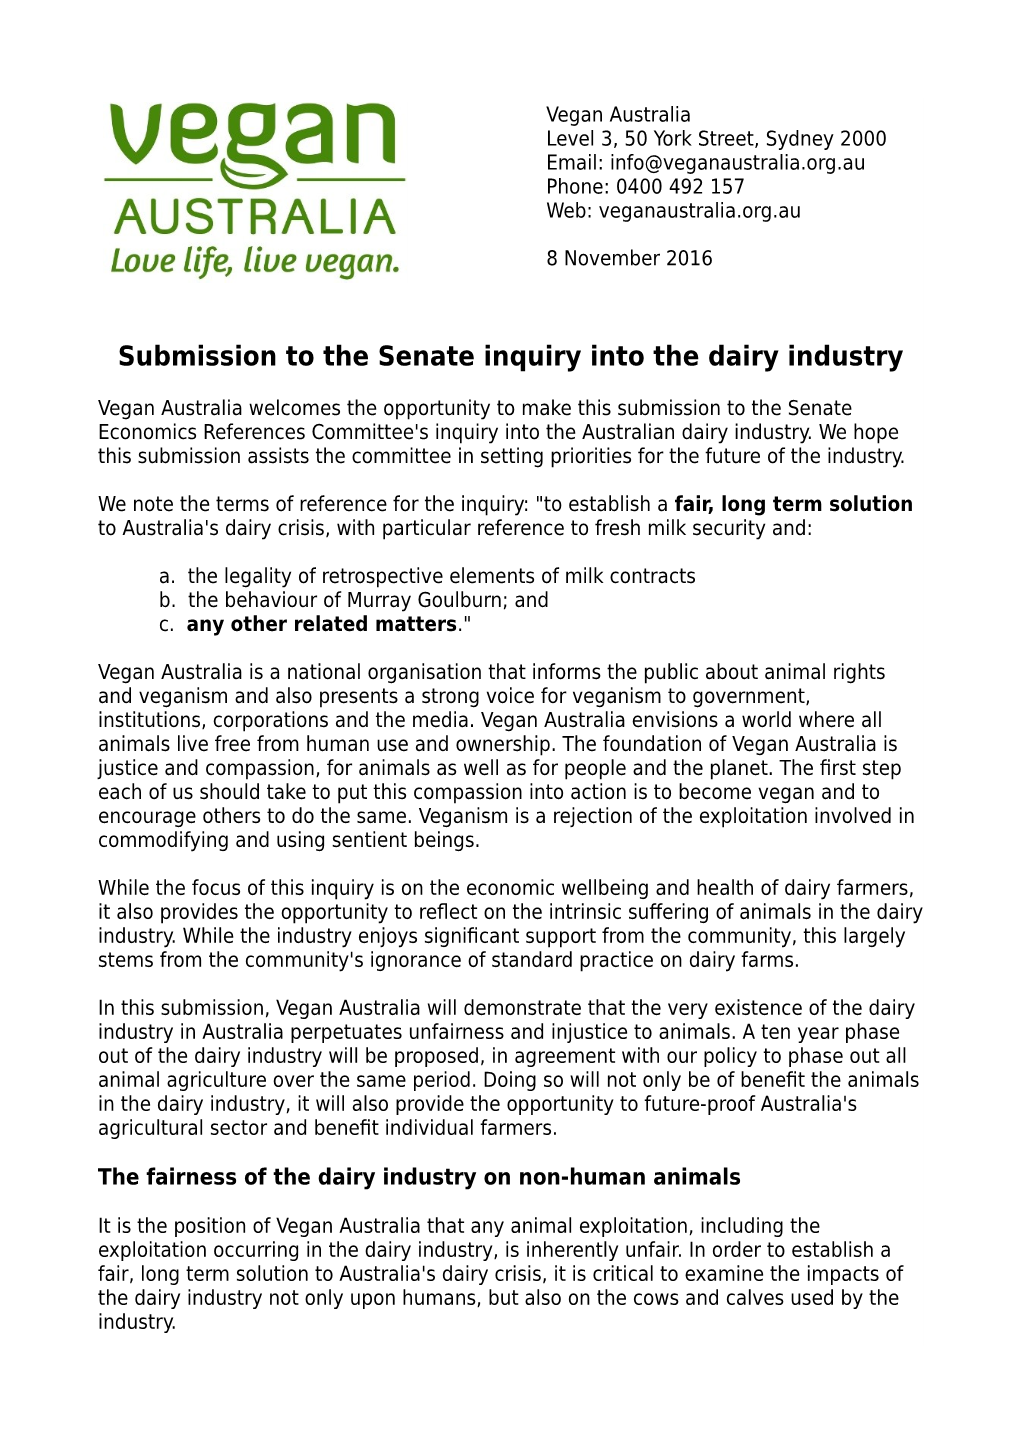 Submission to the Senate Inquiry Into the Dairy Industry